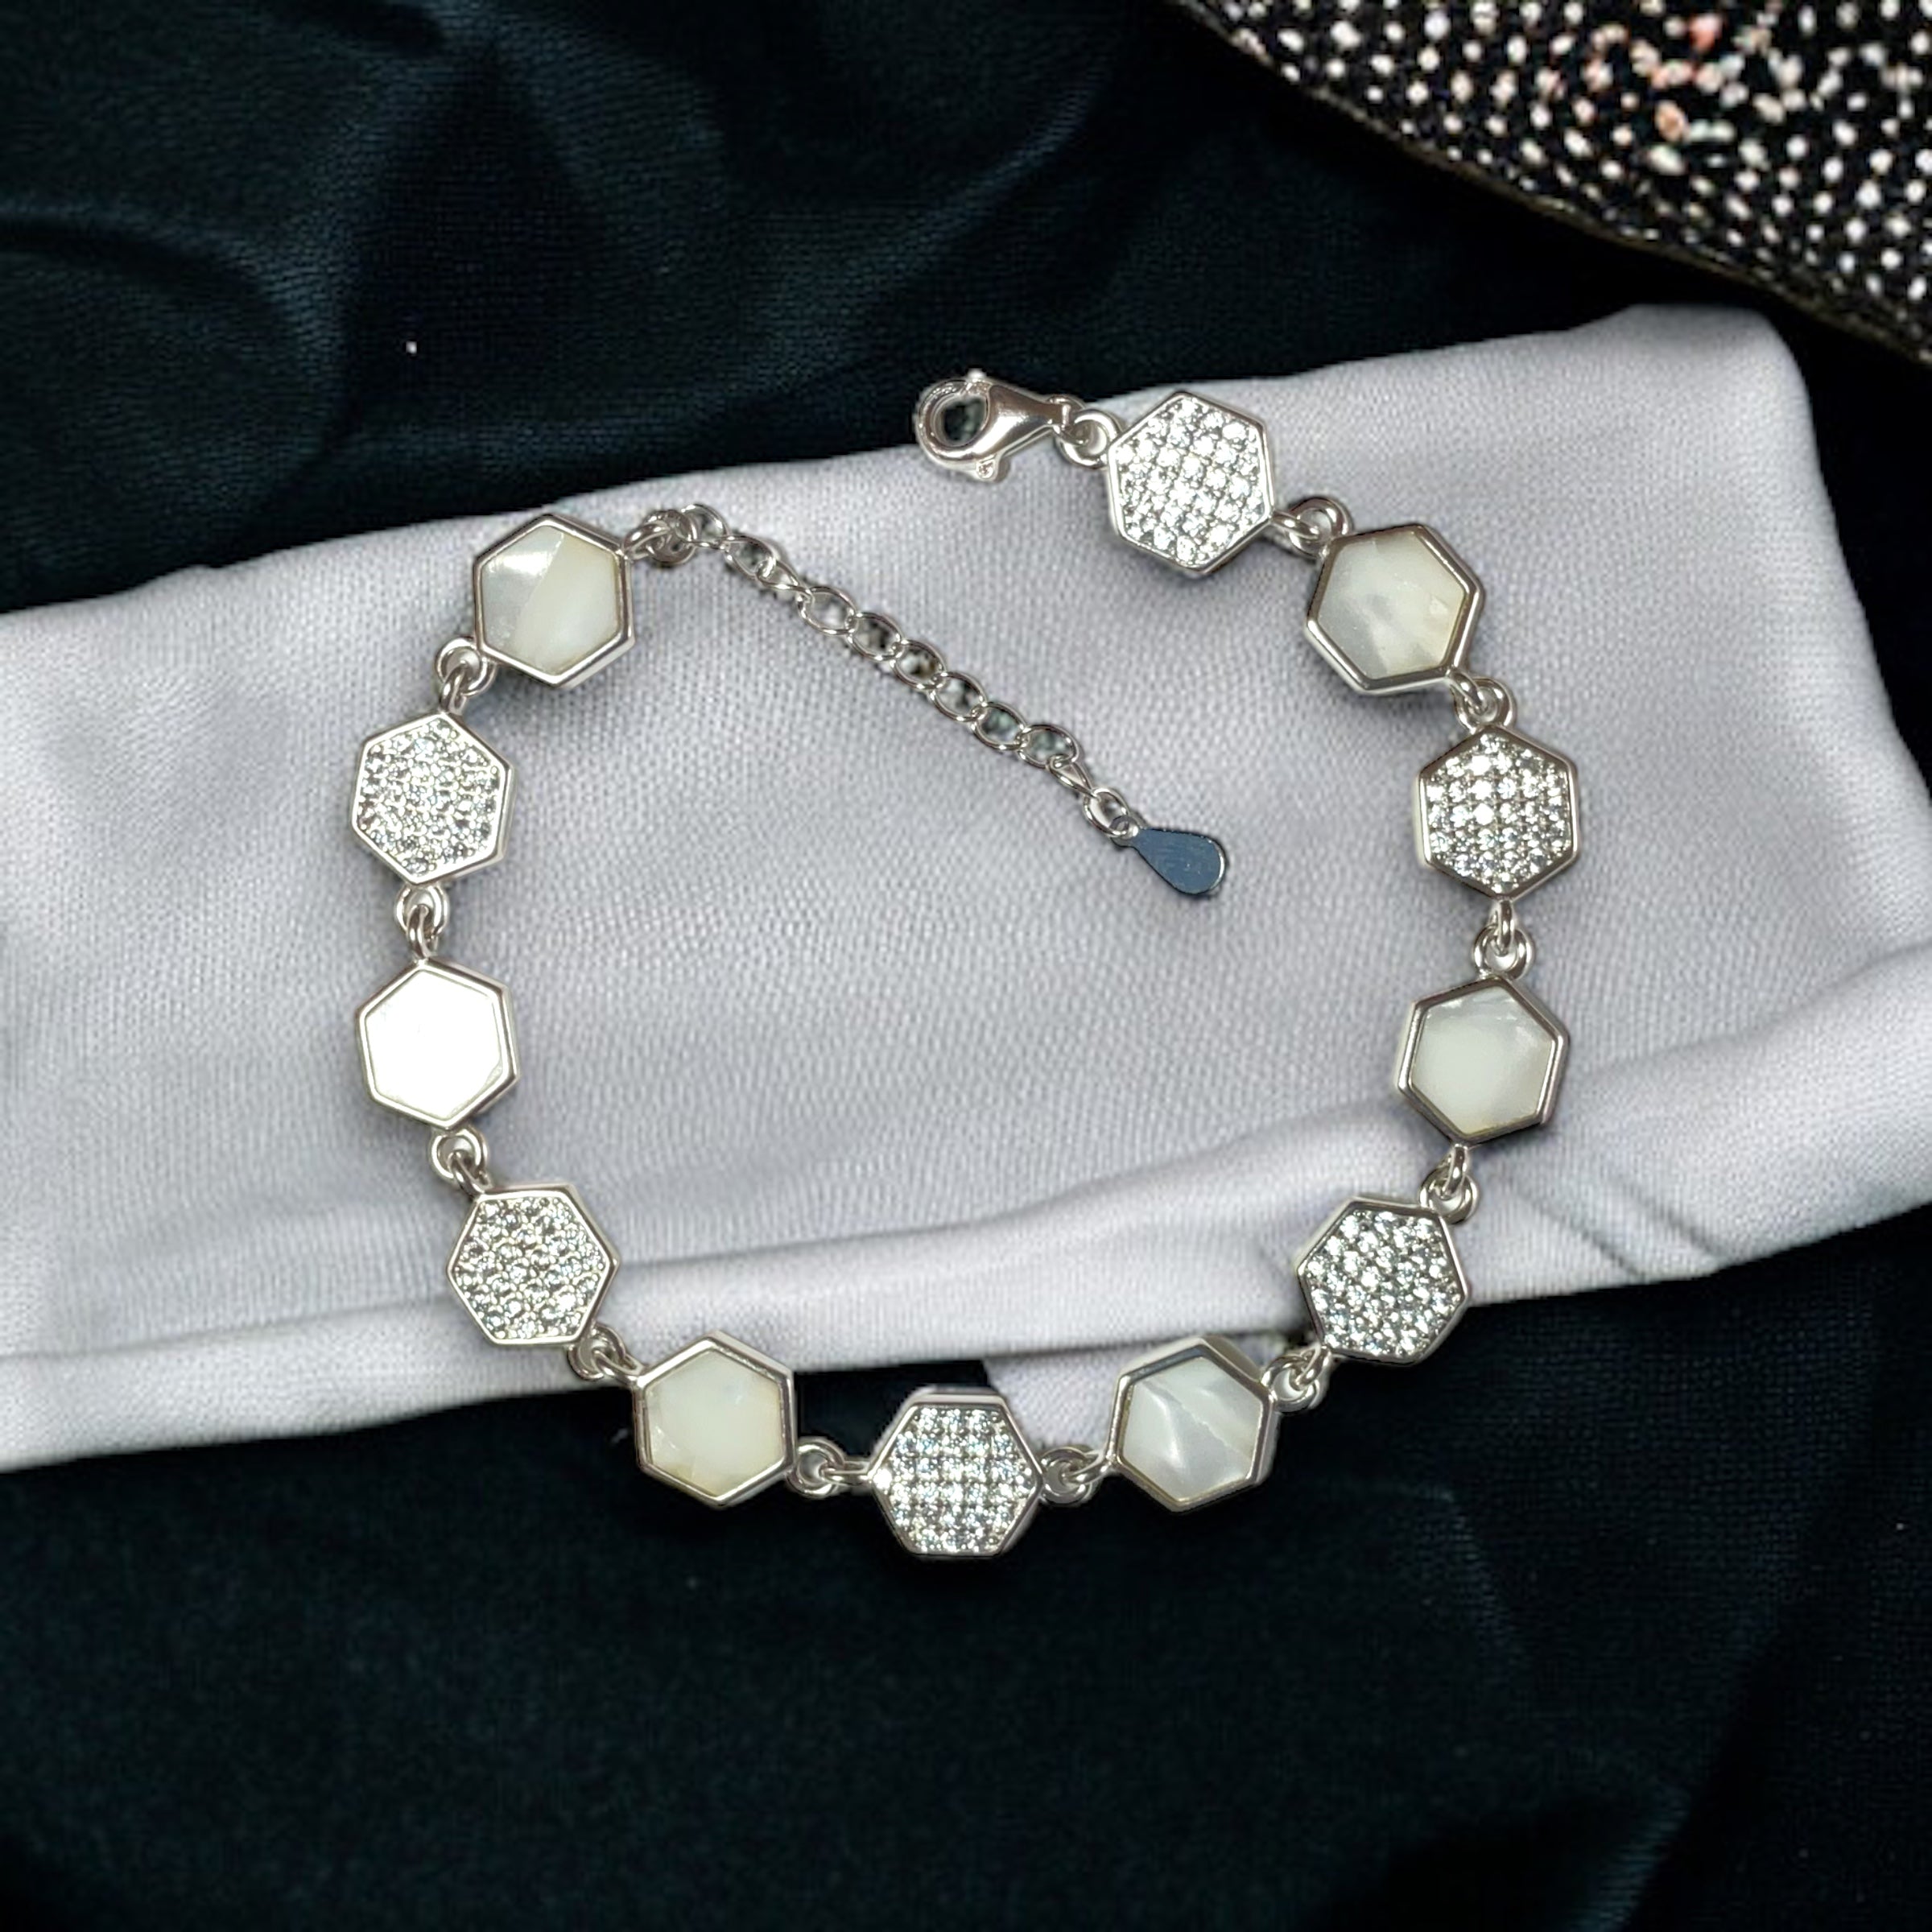 a silver bracelet with white stones on it